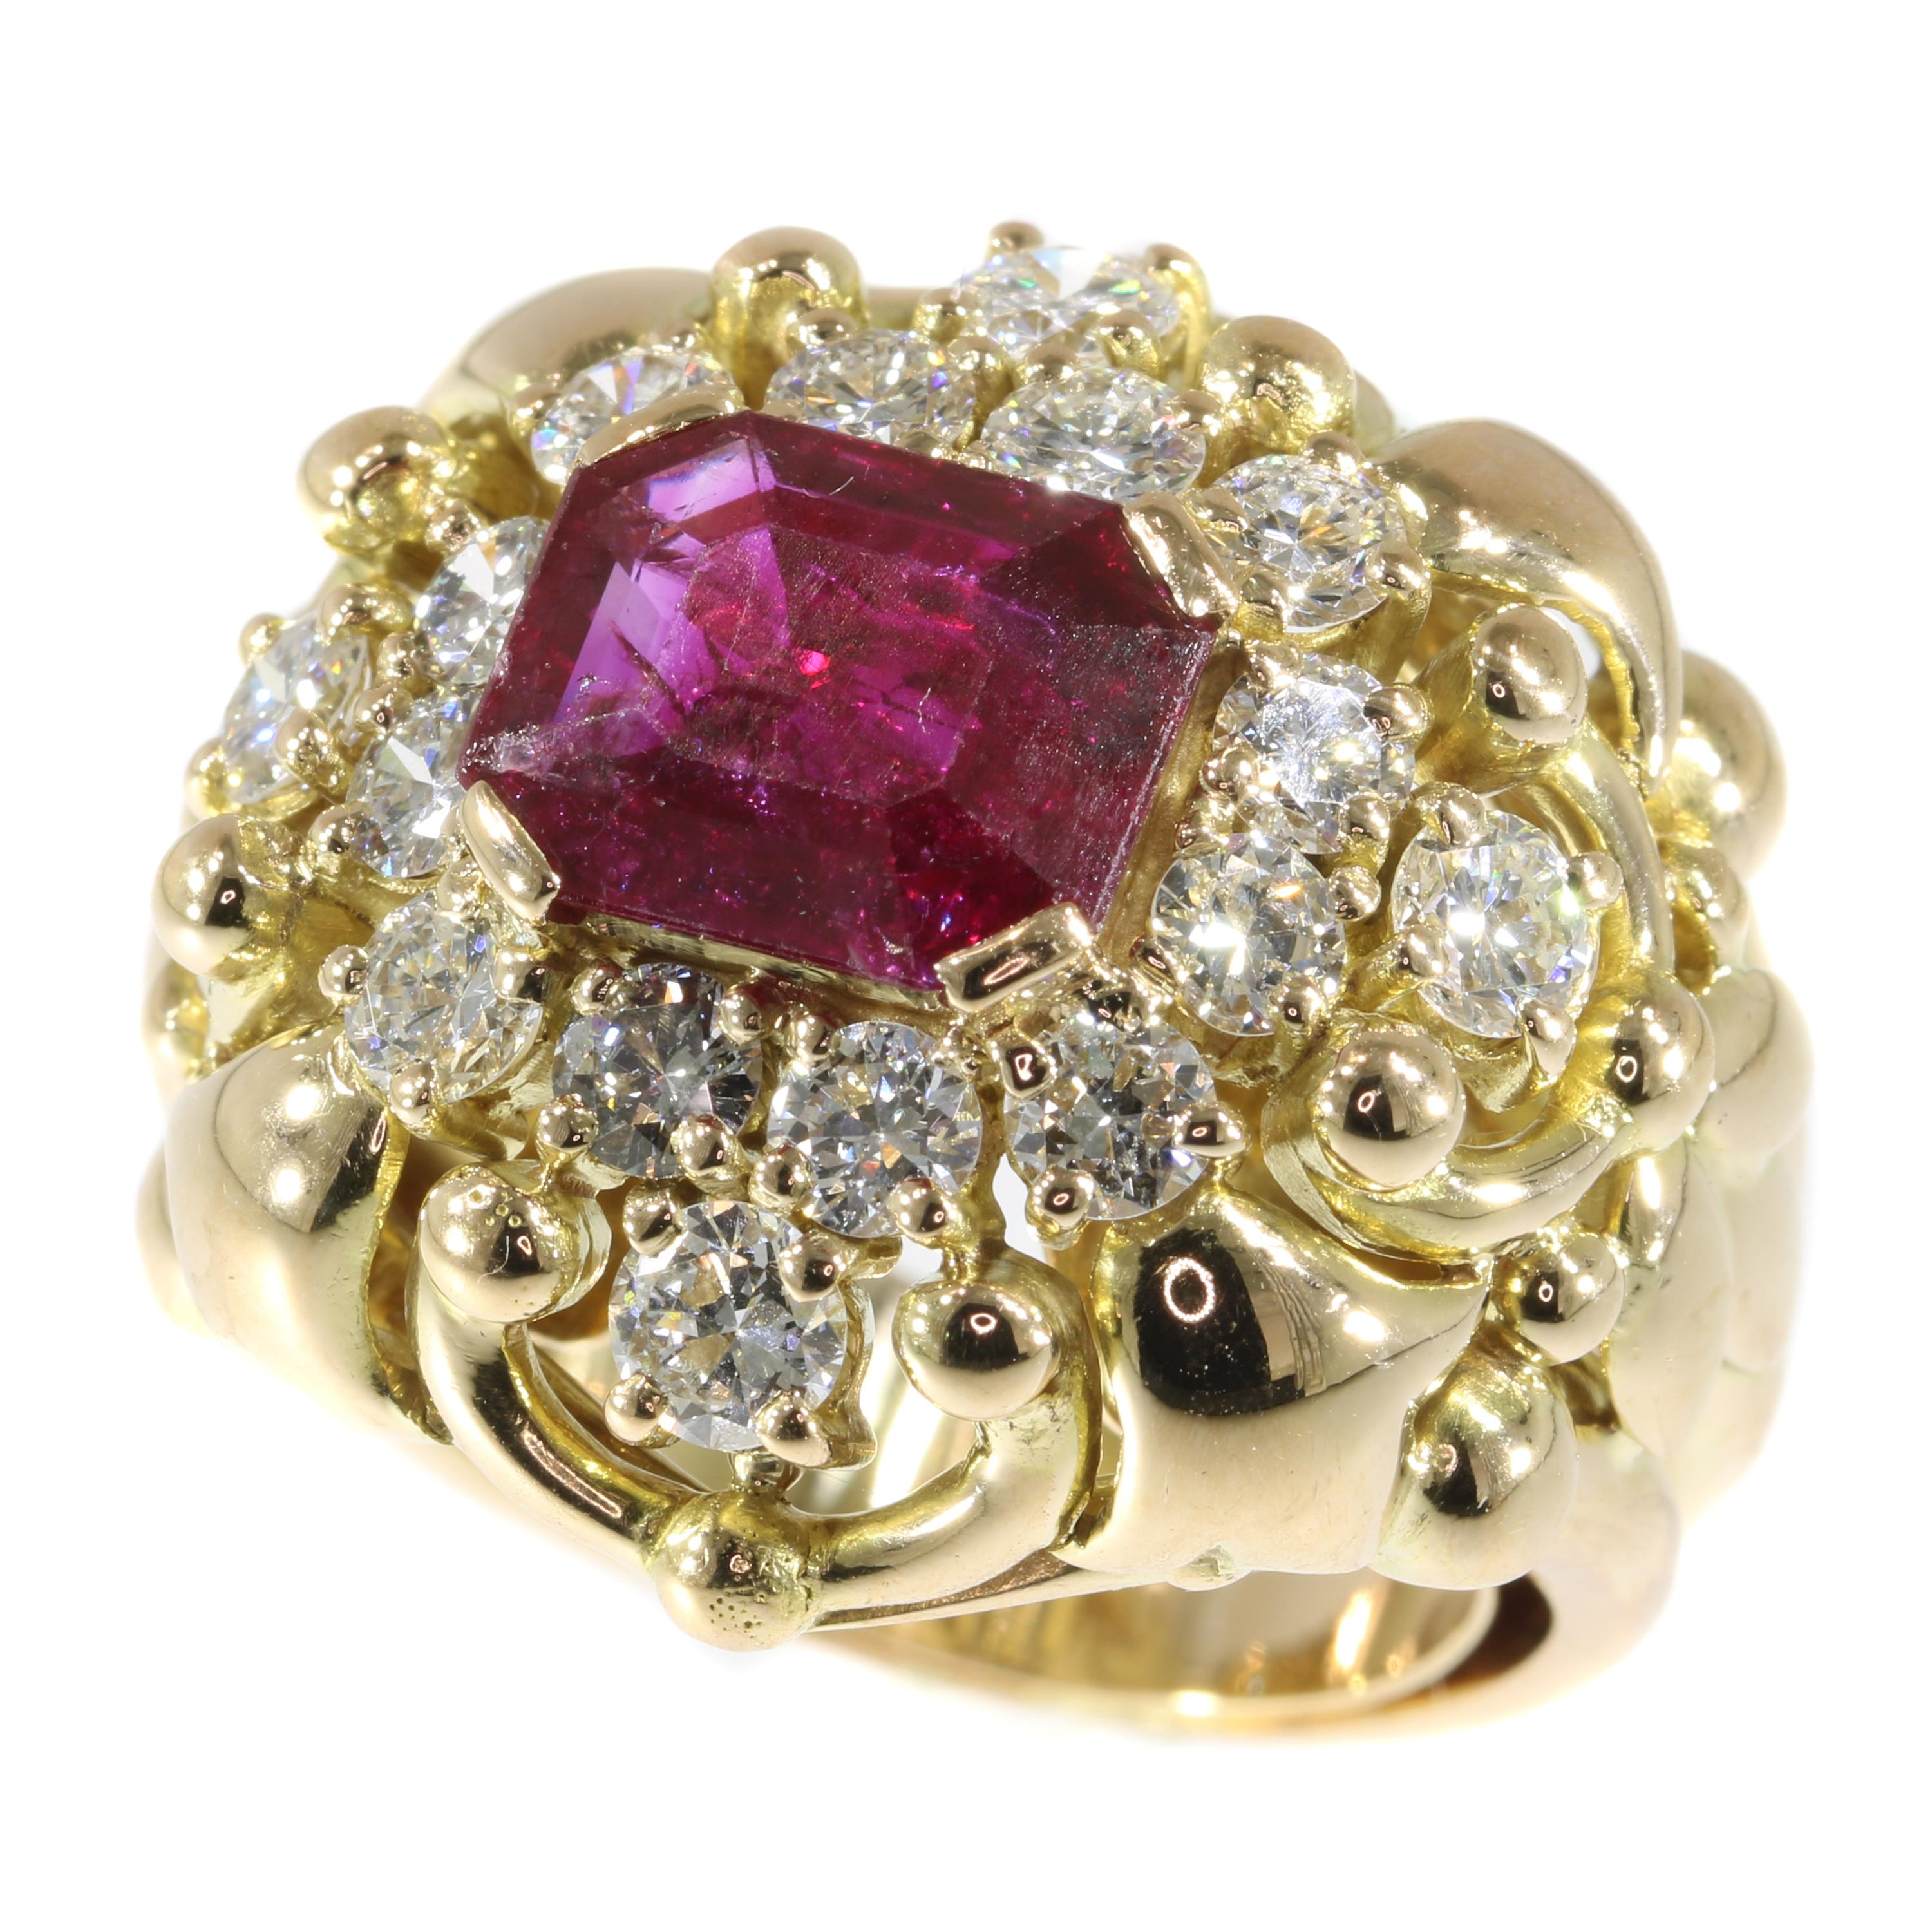 Signed Wolfers 6 Carat Untreated Ruby and Diamond Cocktail Ring, 1950s